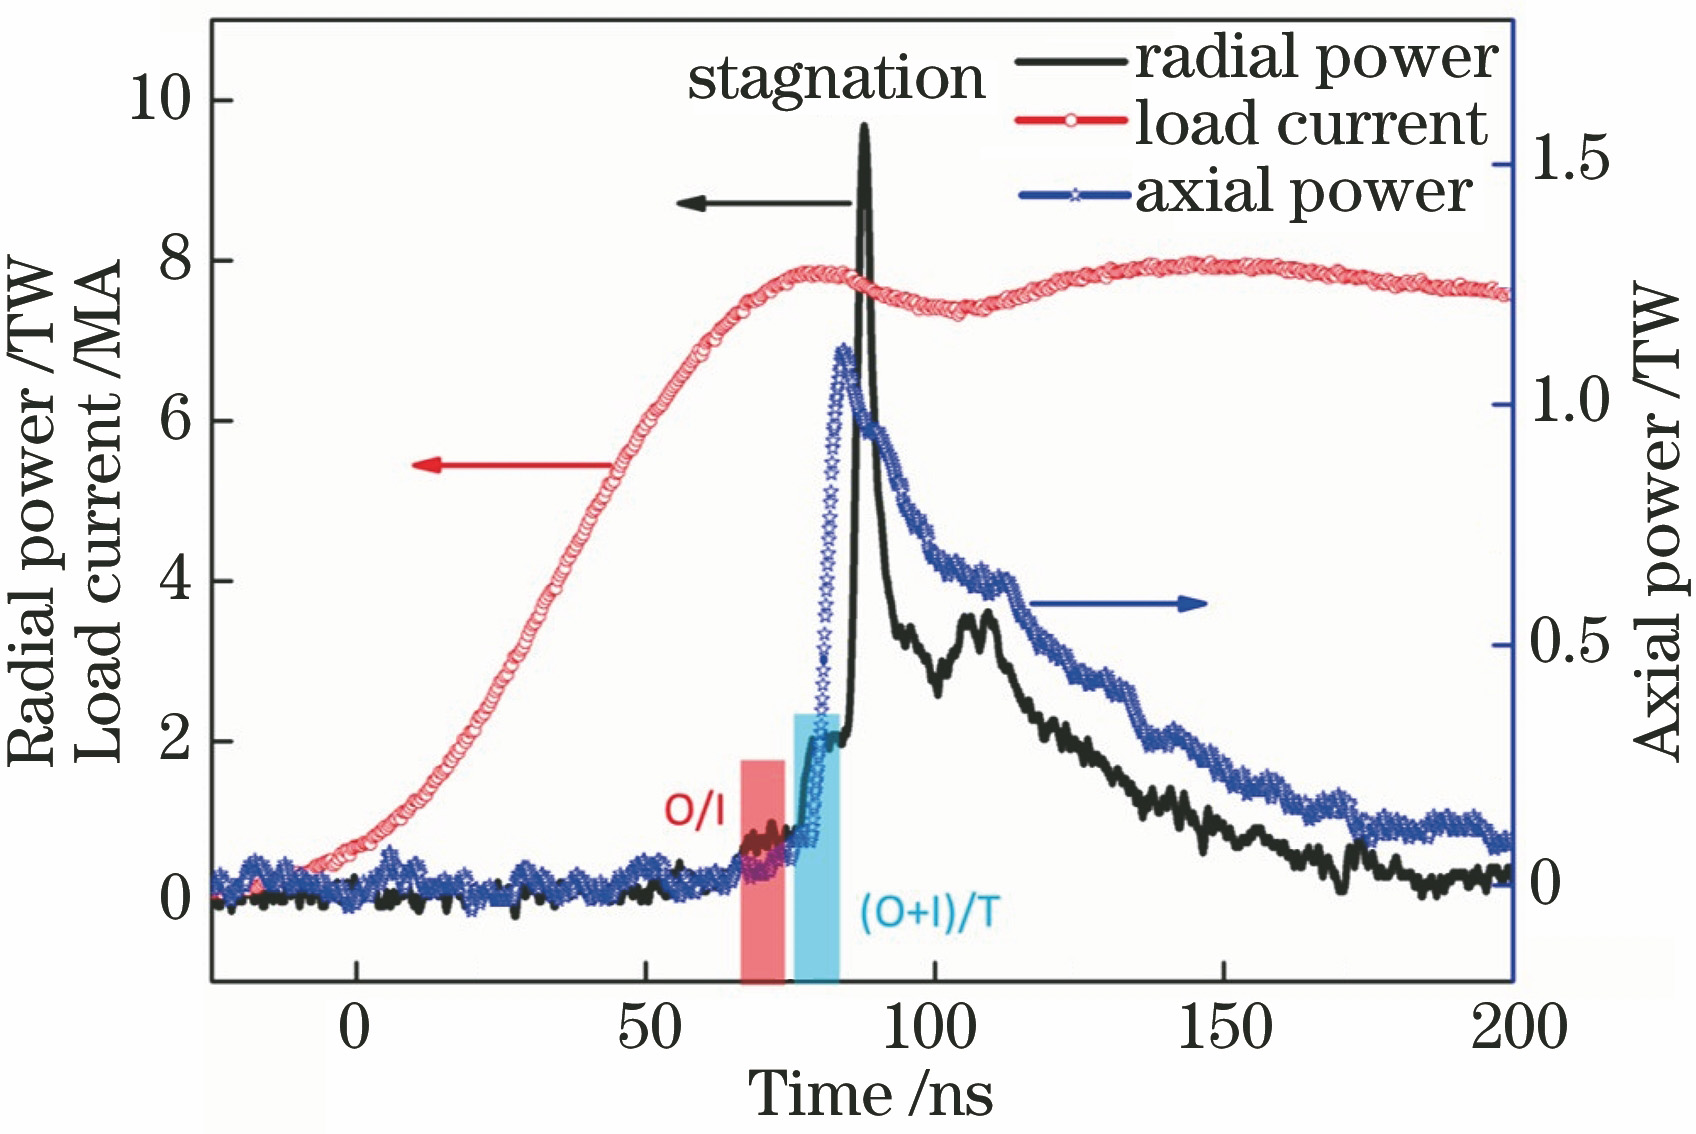 Radial power and load current waveform of dynamic hohlraum on the 8-MA facility